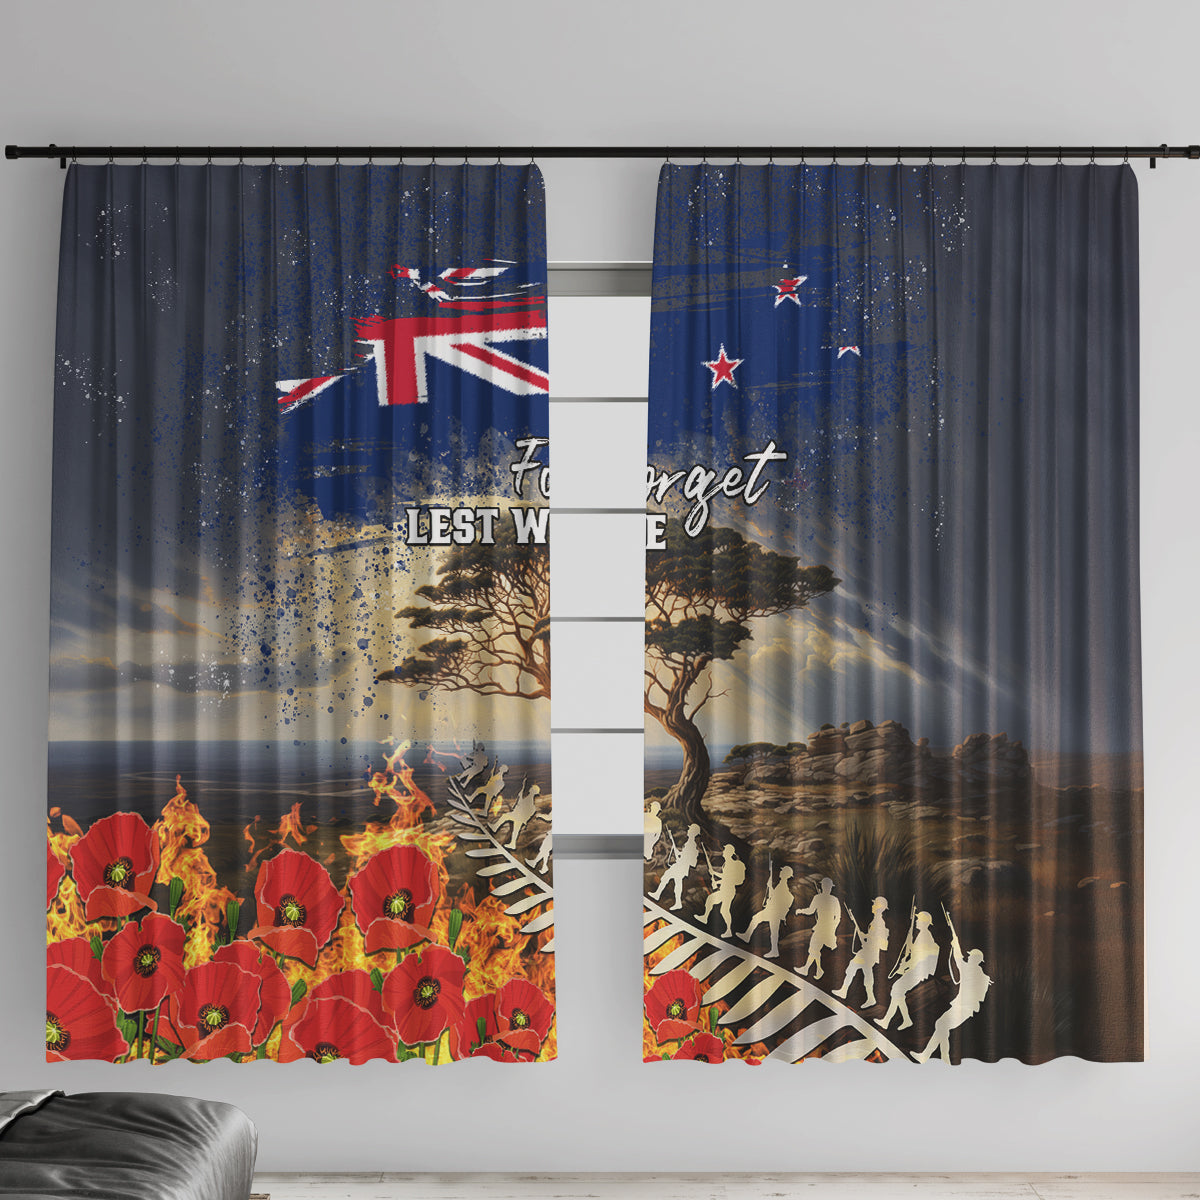 New Zealand ANZAC Day Window Curtain The Lonesome Pine With Soldier Fern LT05 With Hooks Blue - Polynesian Pride